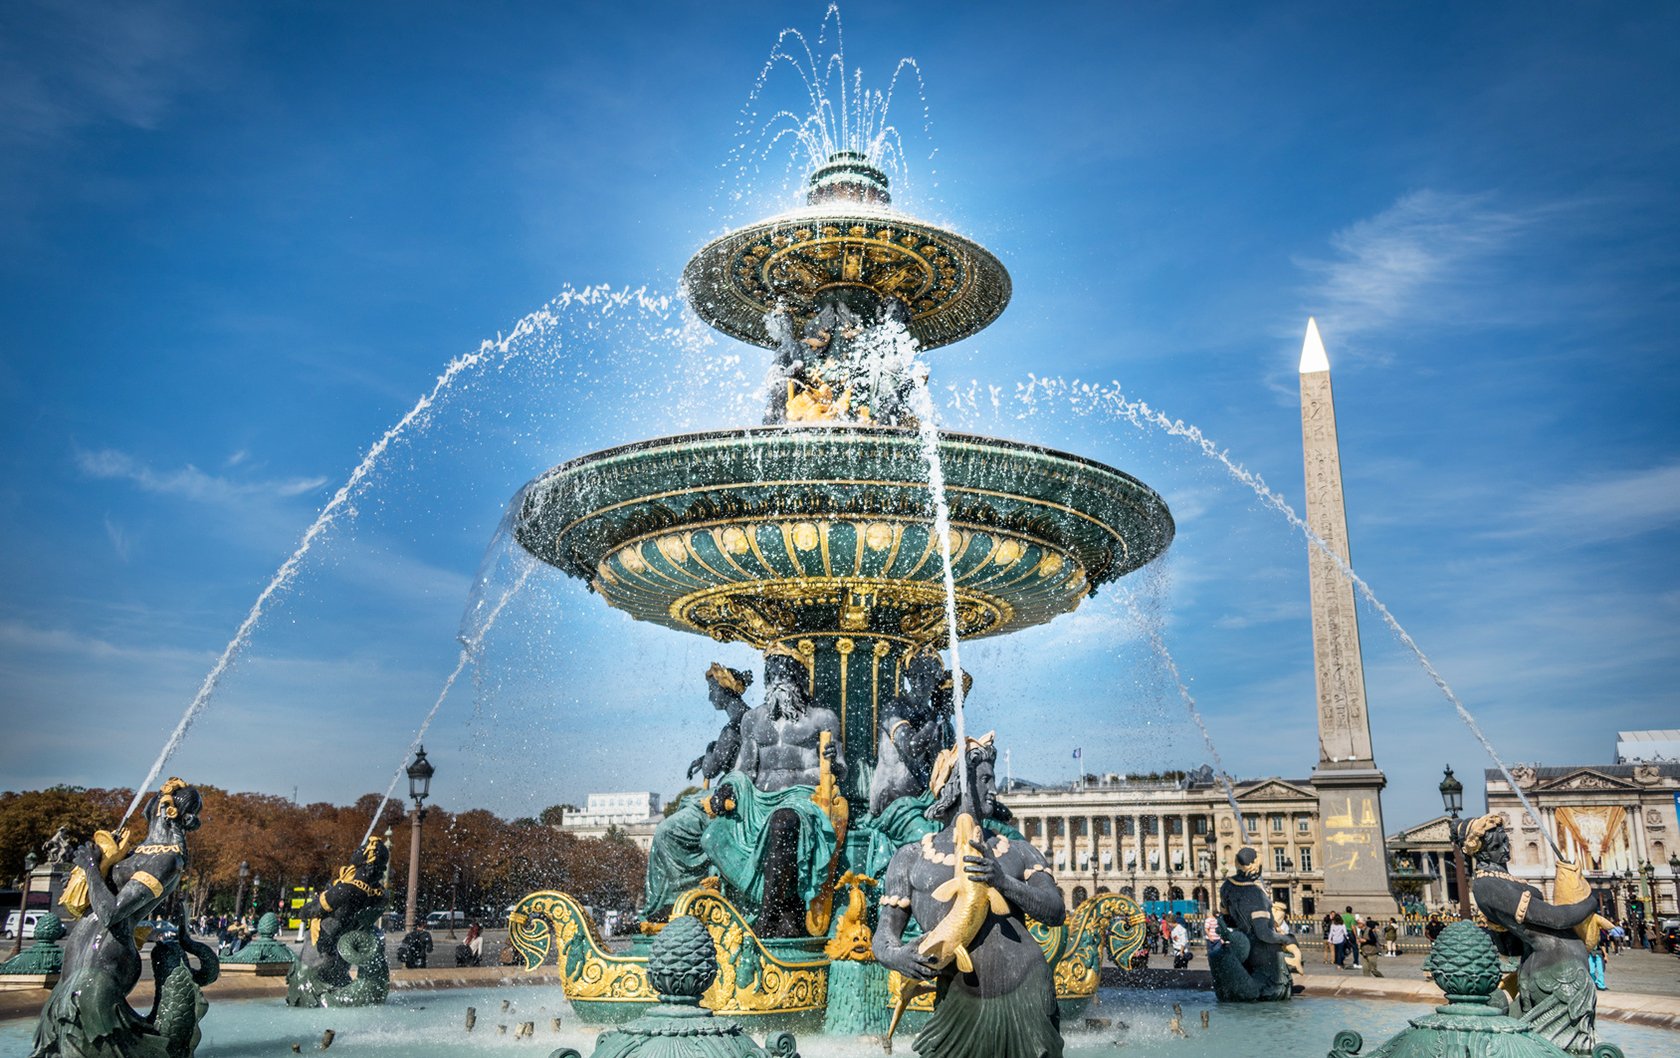 Fountain of Warsaw in Europe